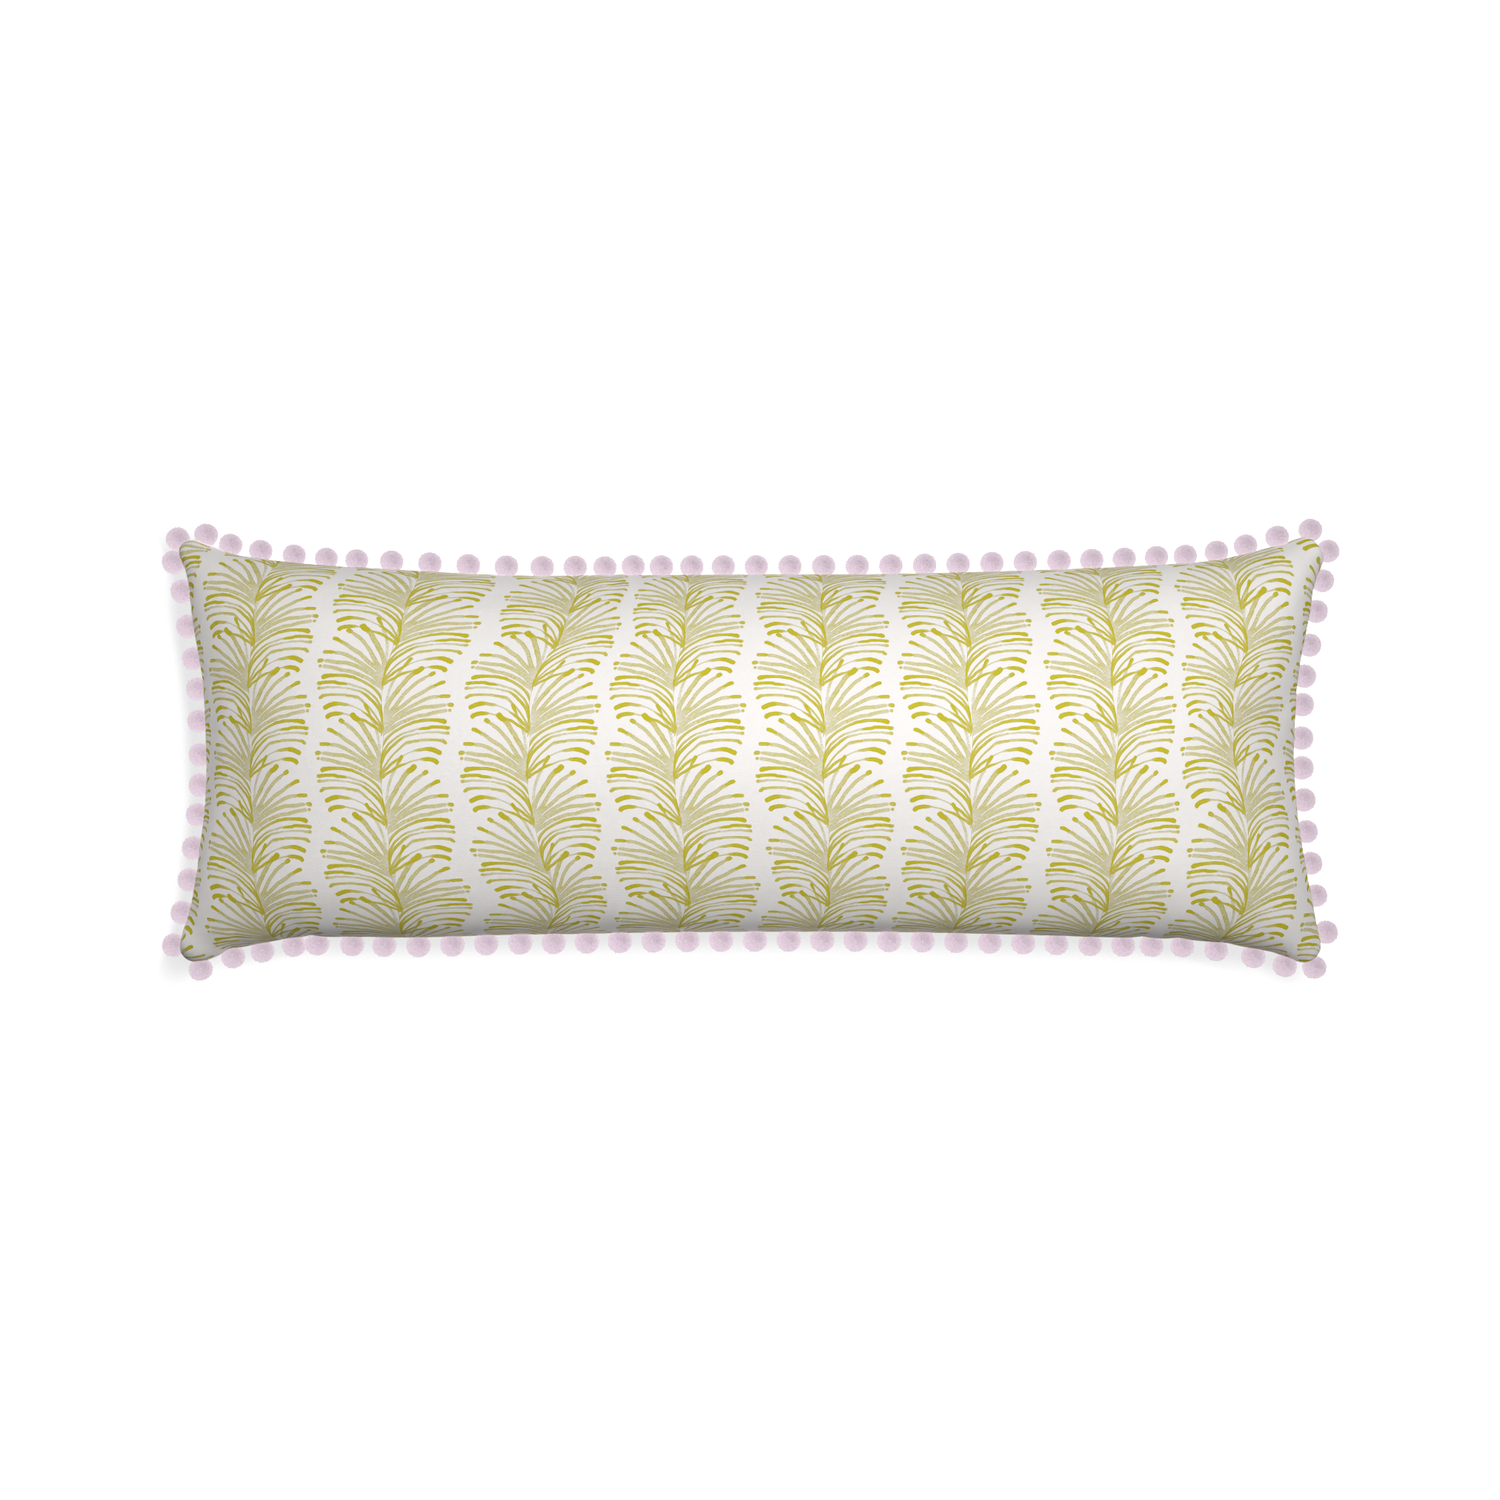 Xl-lumbar emma chartreuse custom pillow with l on white background